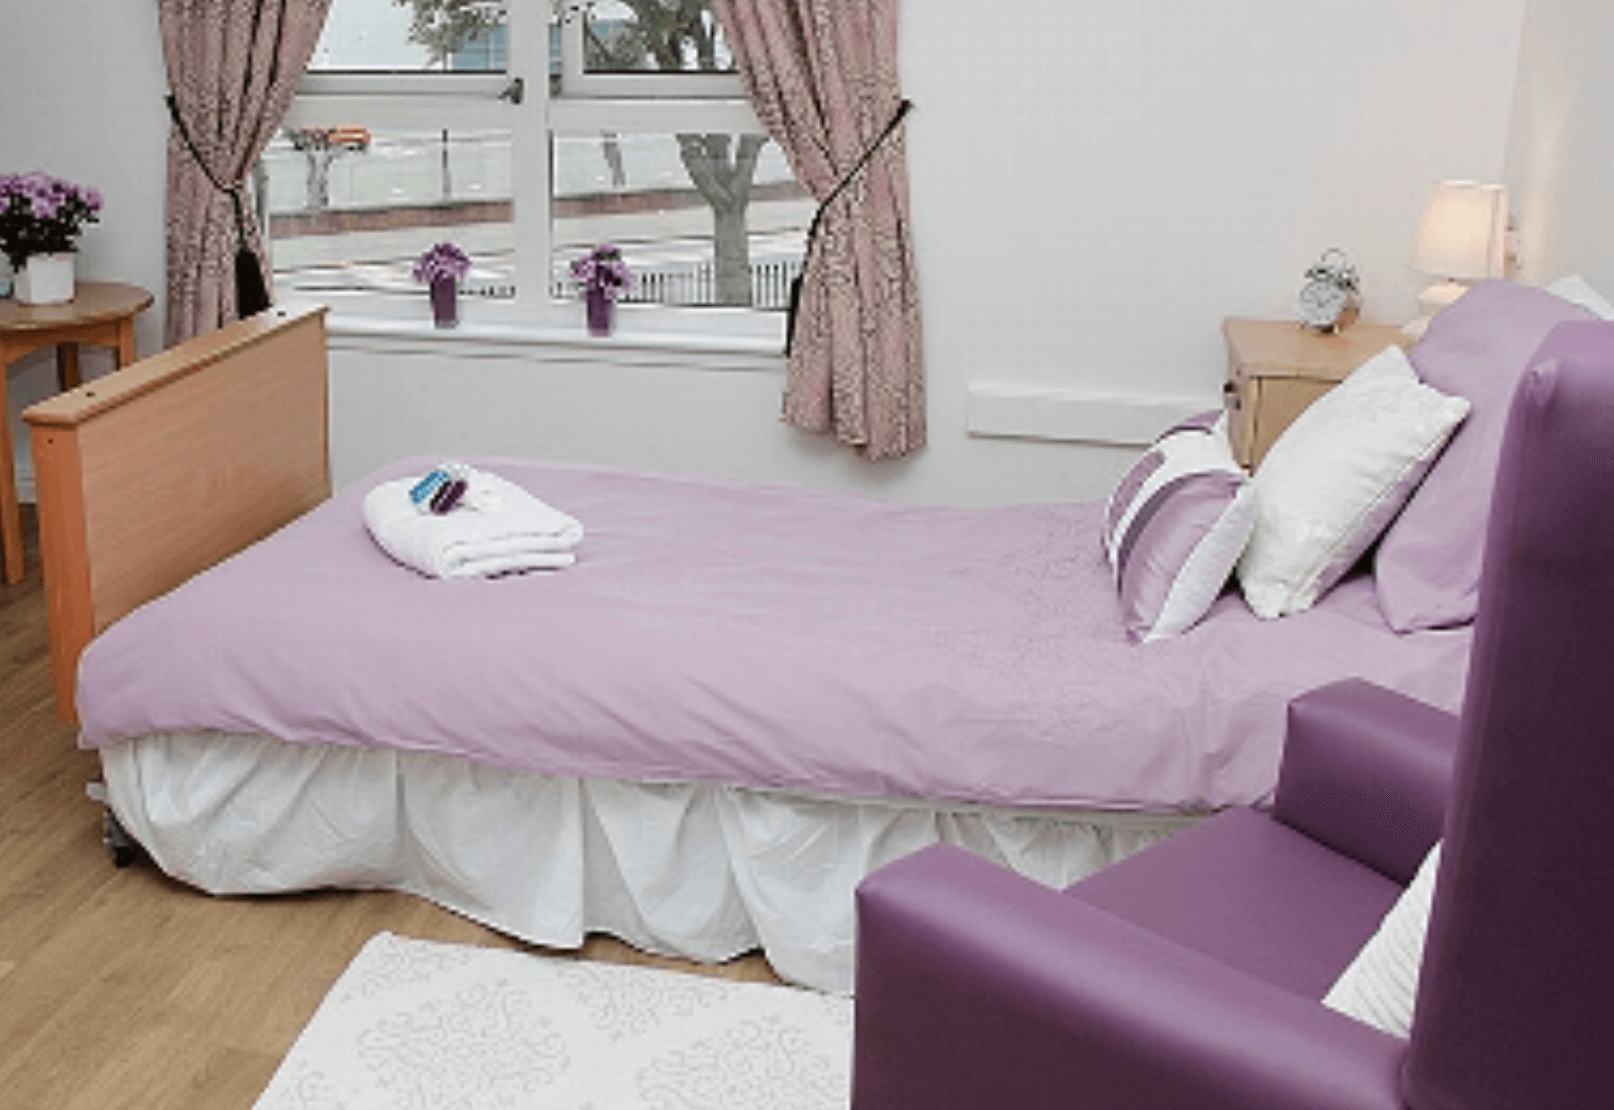 Bedroom of Craigbank Care Home in Glasgow, Scotland